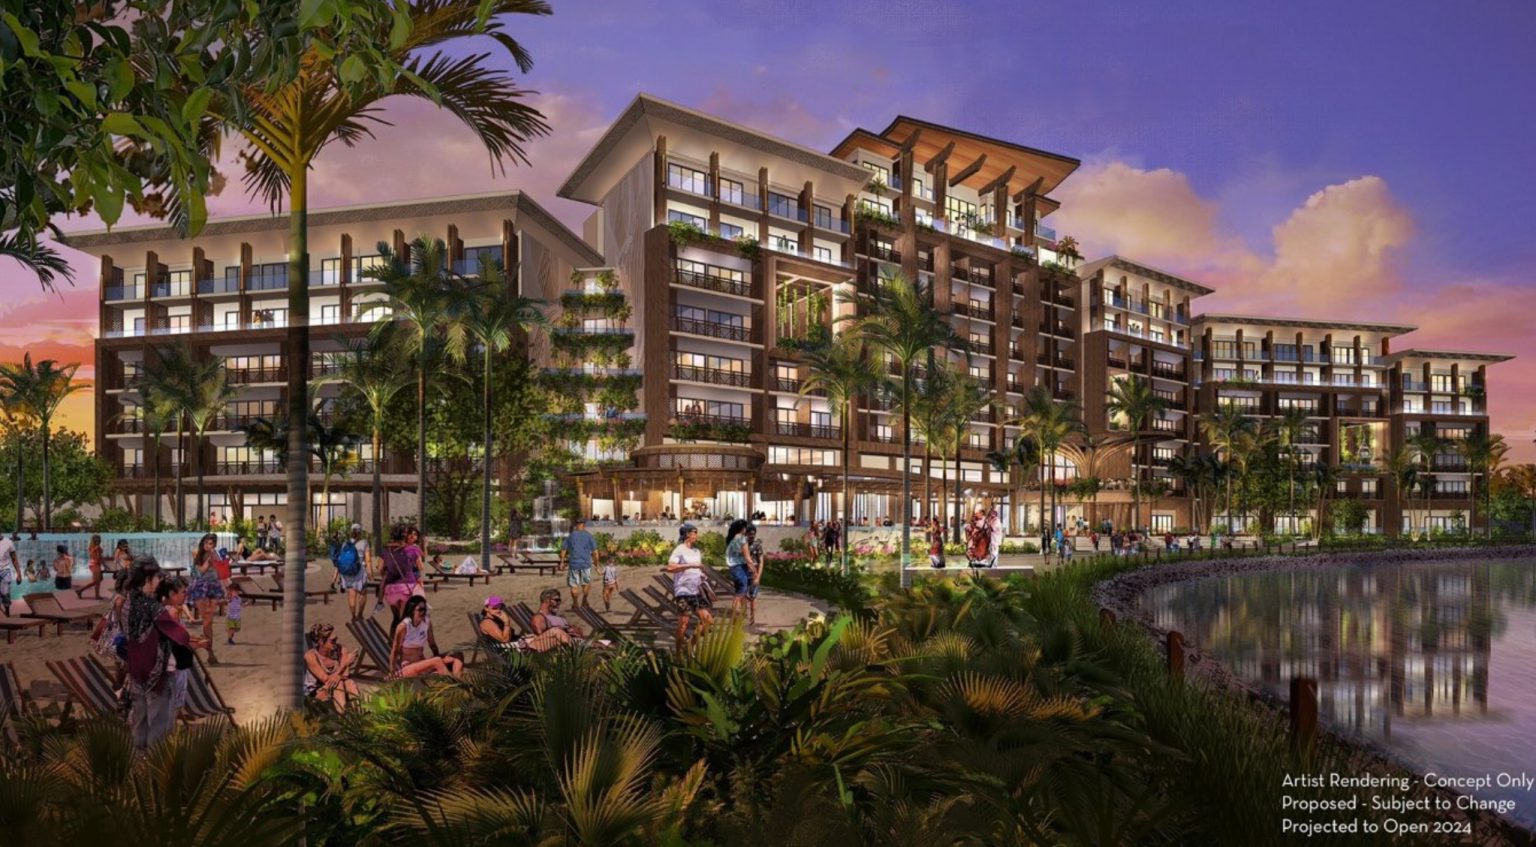 BREAKING NEW DVC Villas are Coming to the Polynesian Resort at Disney World Disney Food